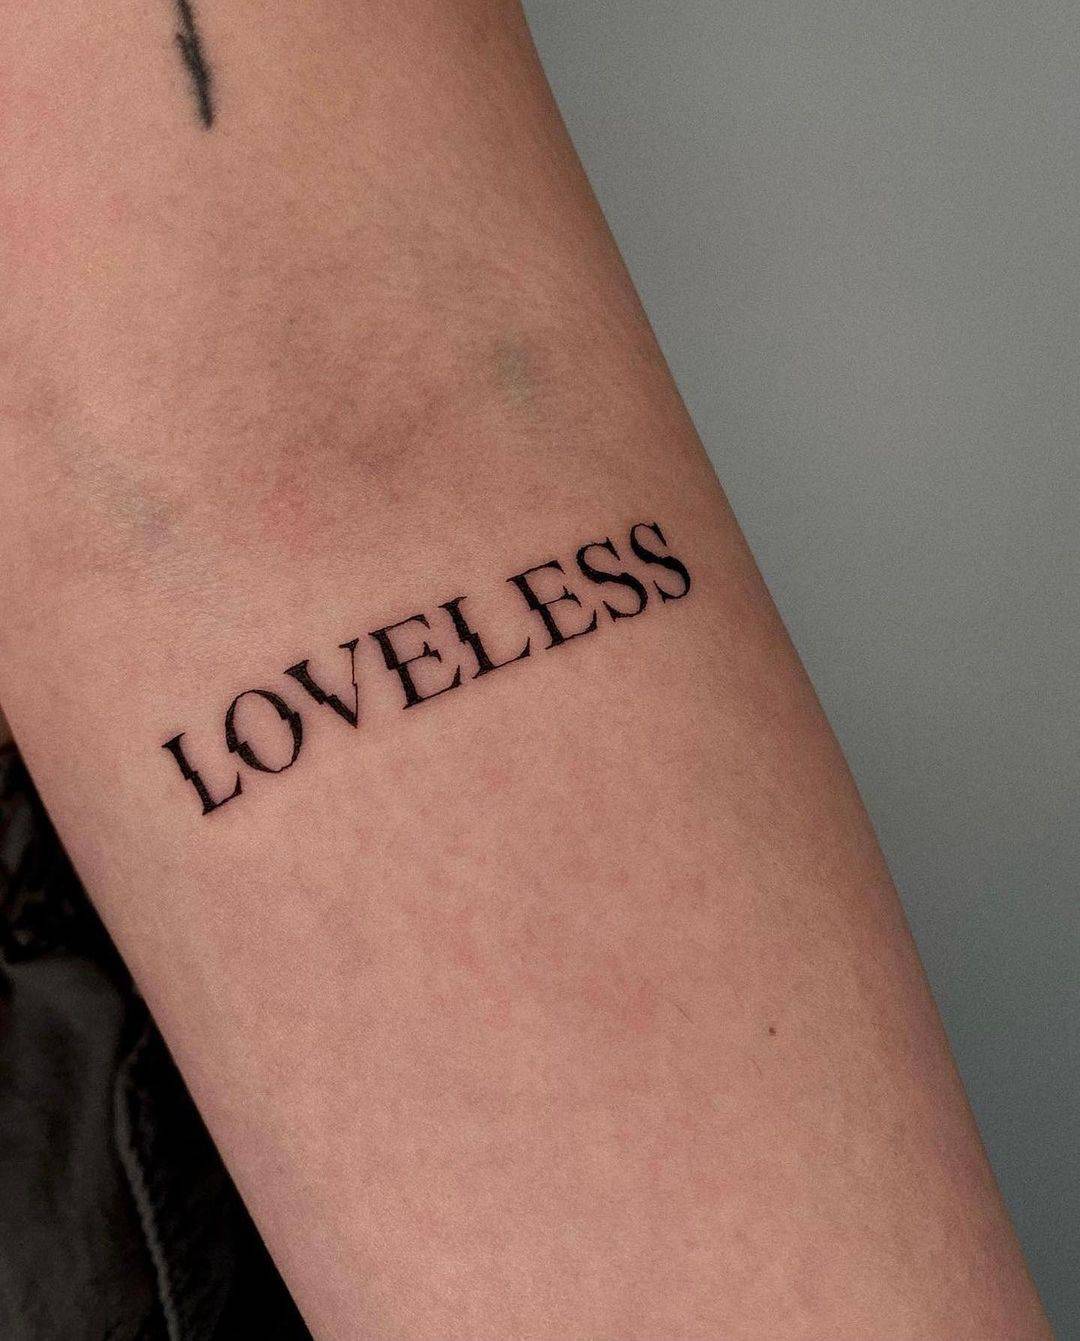 Letters tattoo by auraninetyfour